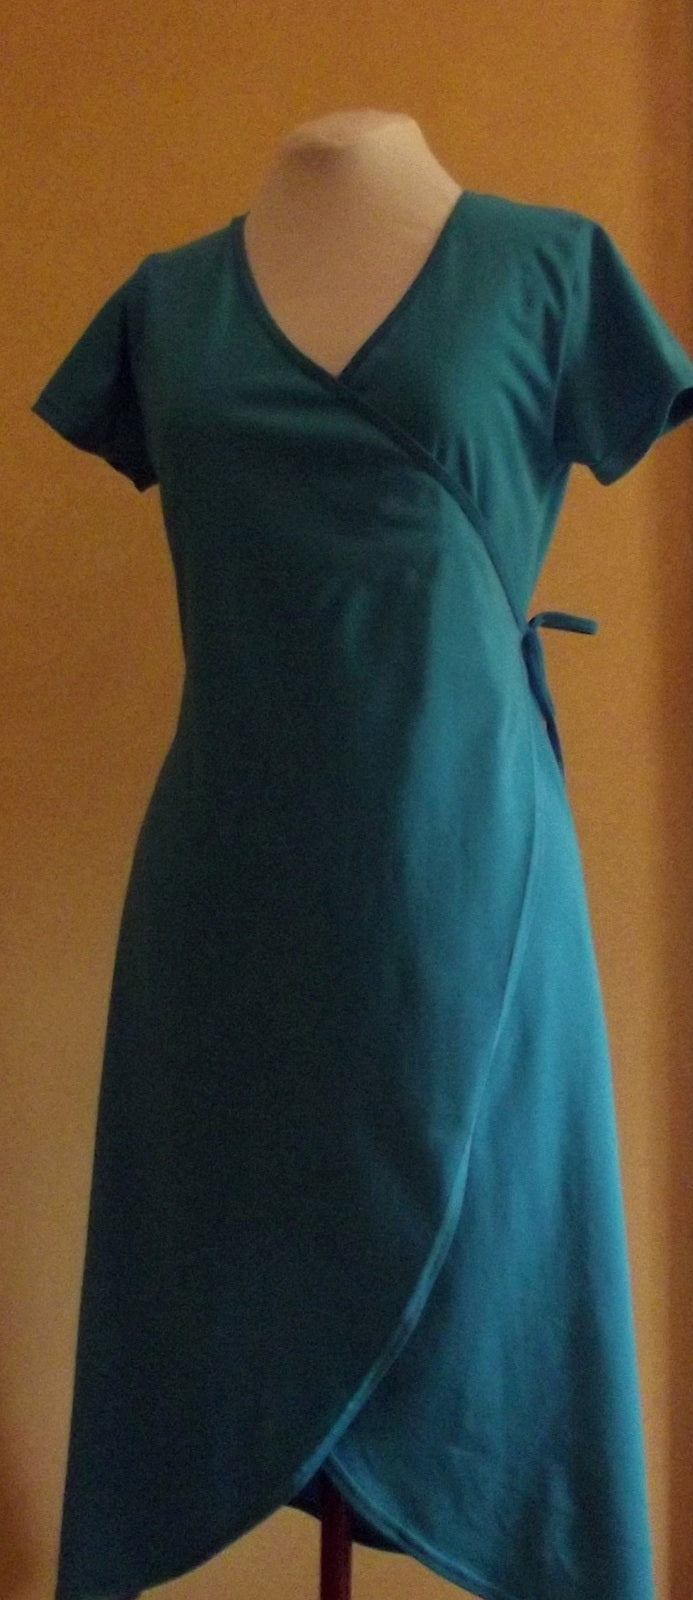 turquoise cotton women's wrap dress with short sleeves